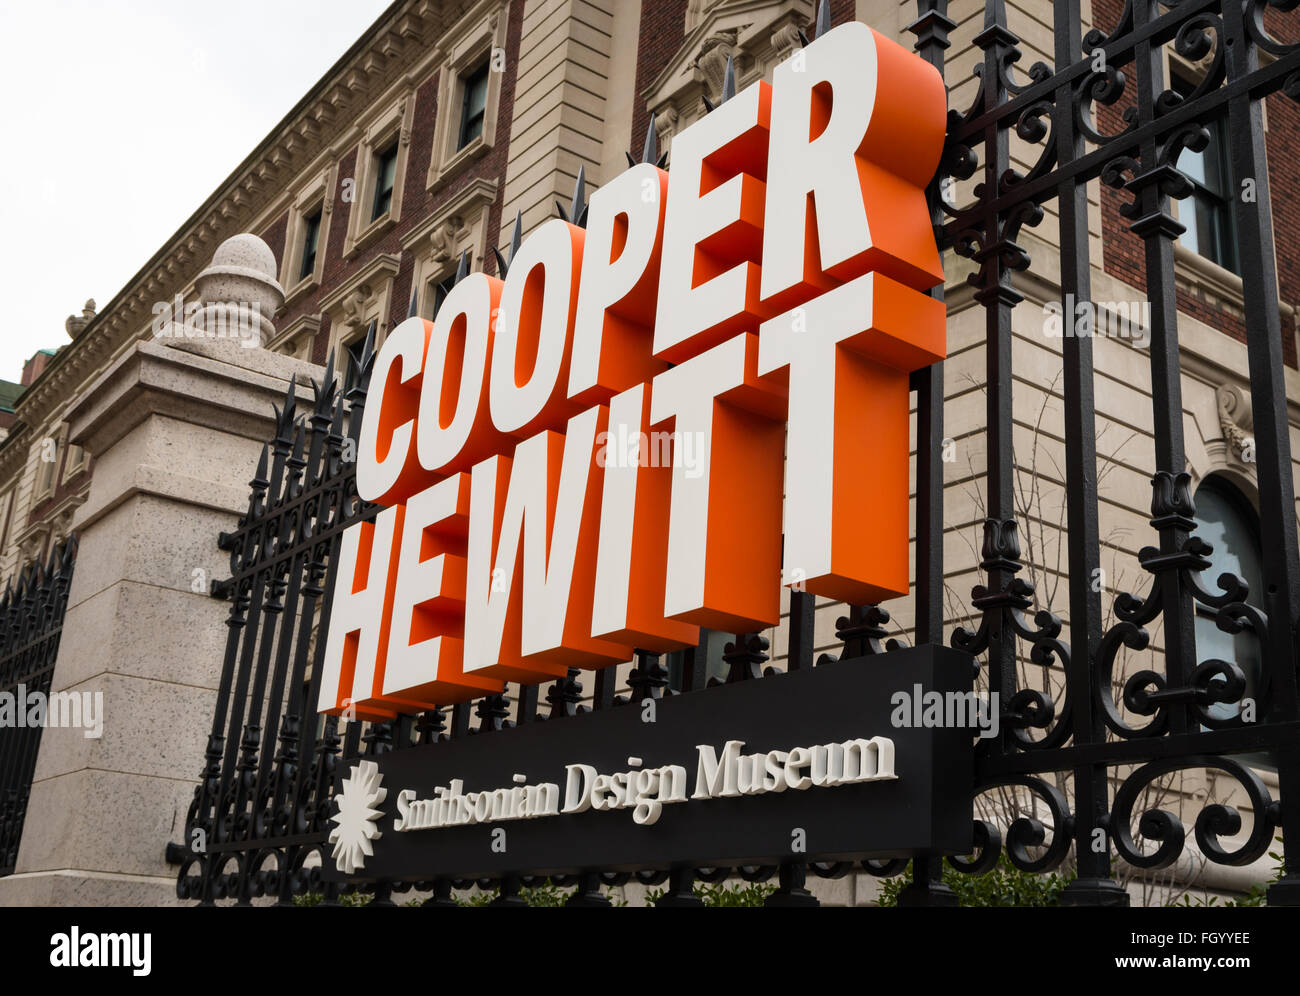 Cooper Hewitt Smithsonian Design Museum exterior and logo sign on 5th Avenue, New York City Stock Photo